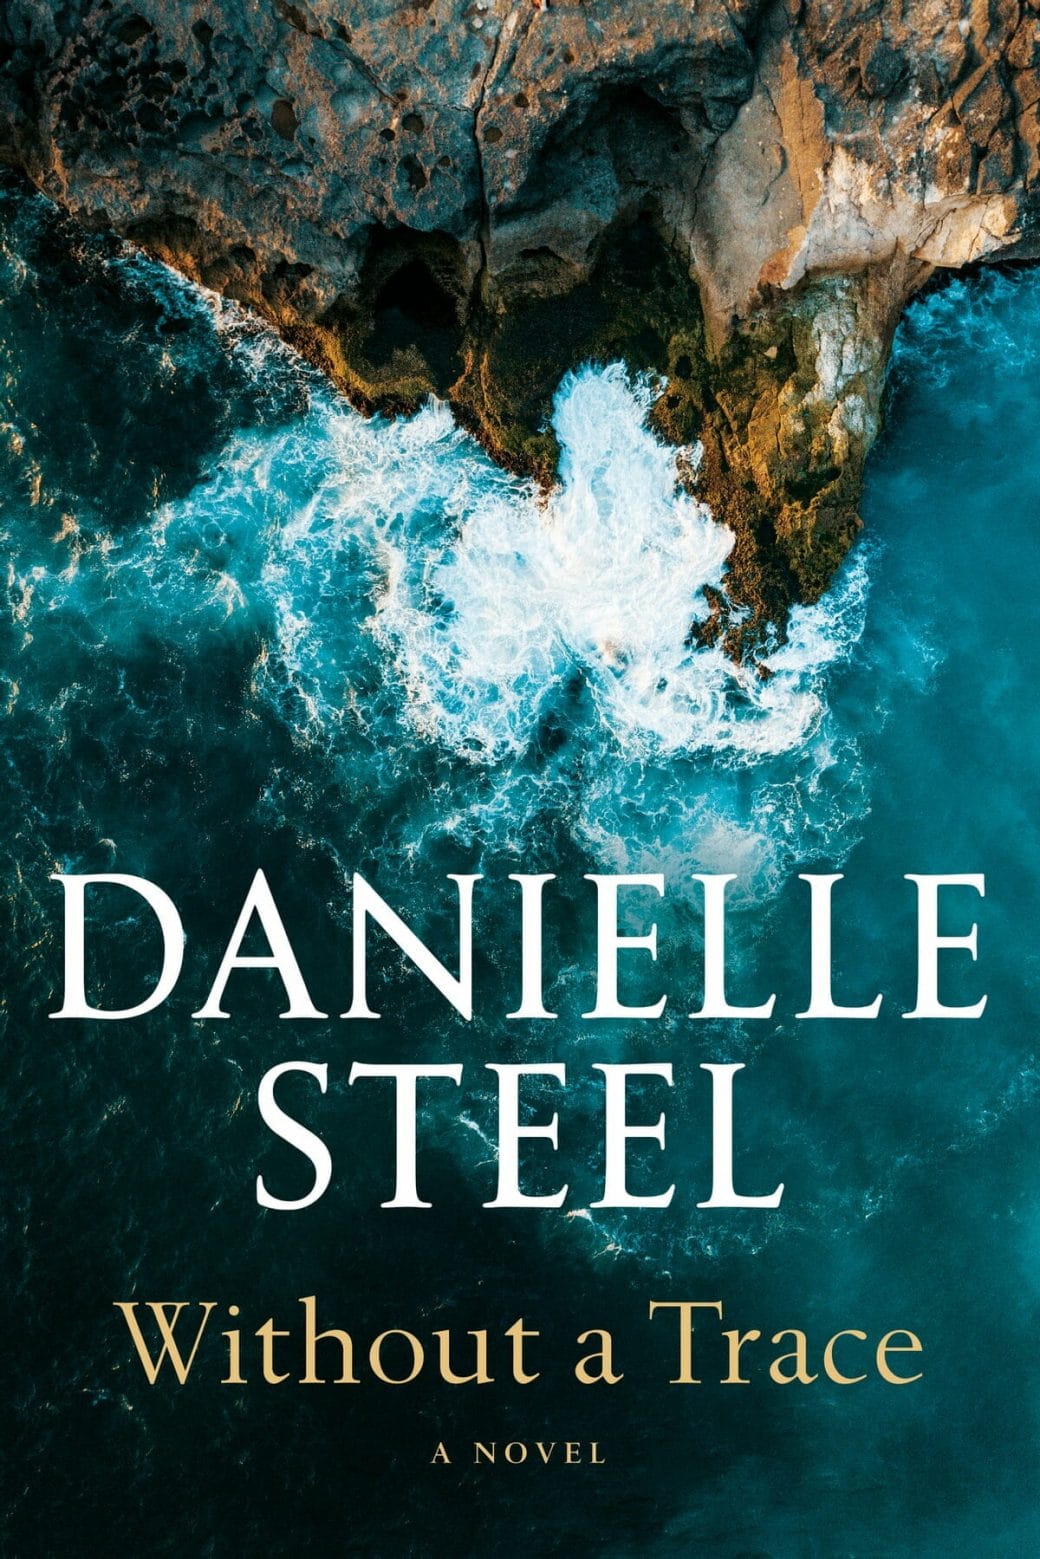 Danielle Steel Books 2023 Every New Release This Year RD